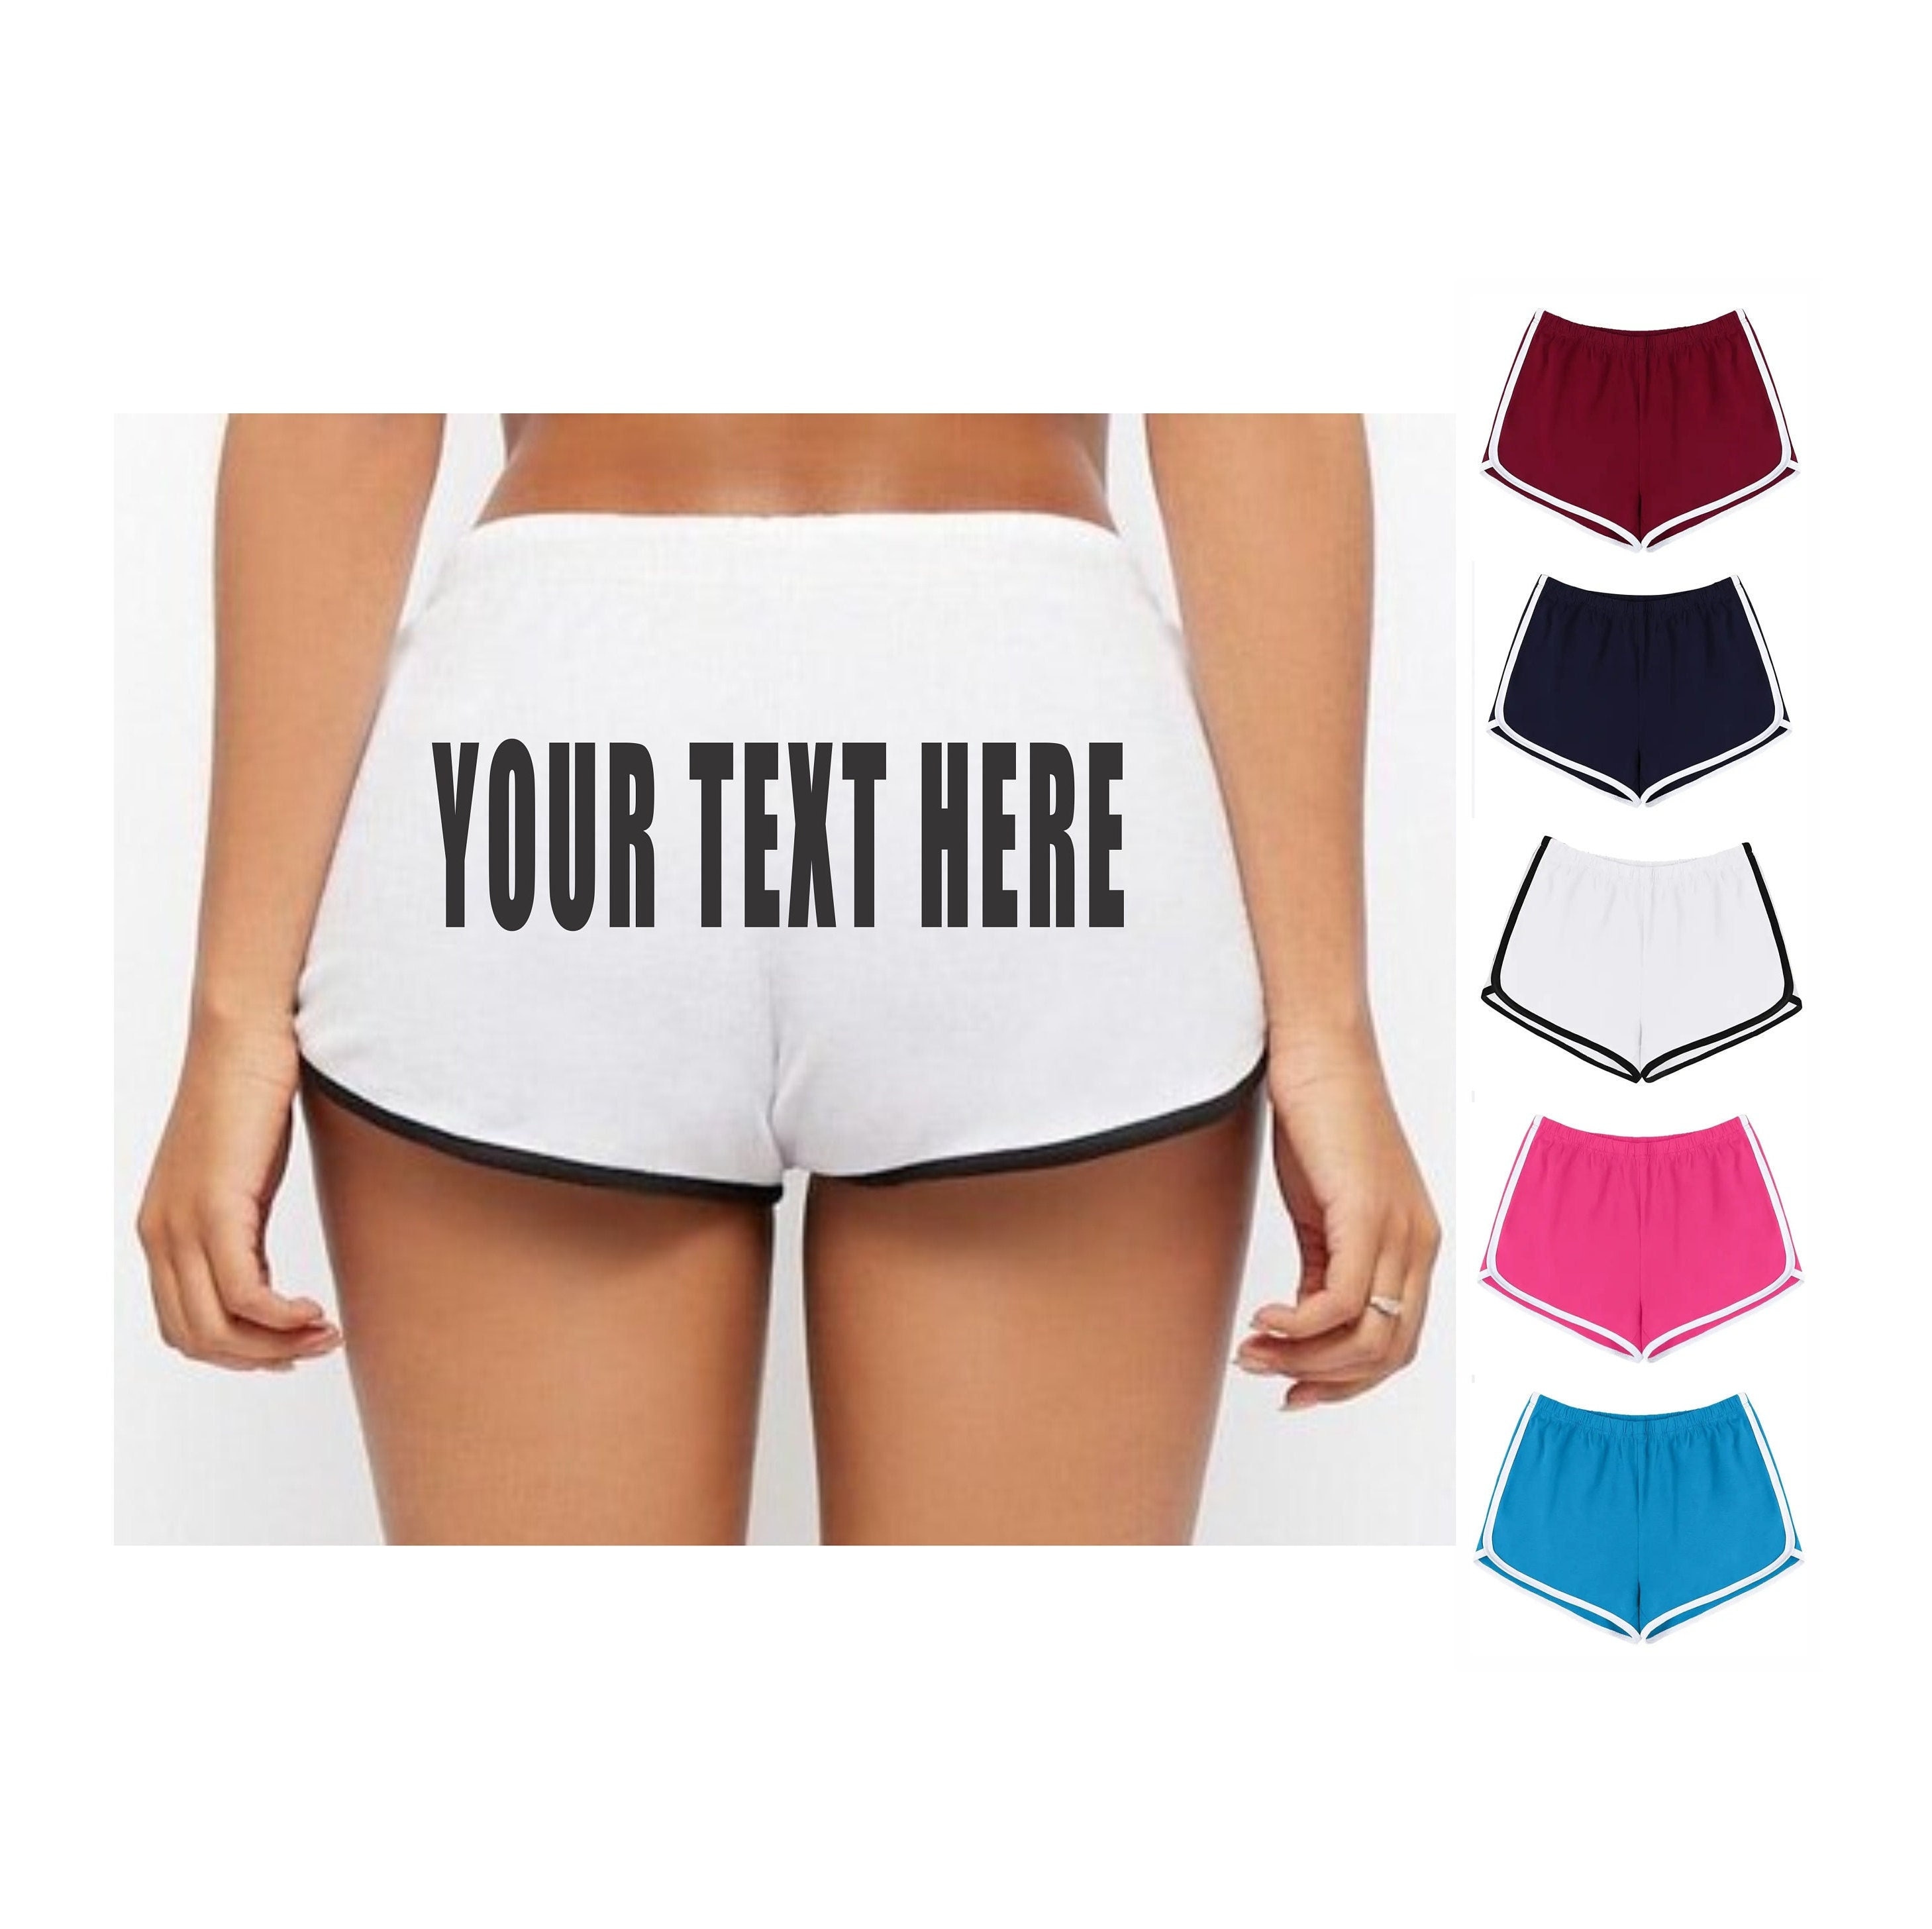 YOUR TEXT HERE Booty Legging Shorts Gym Work Out Crisscross